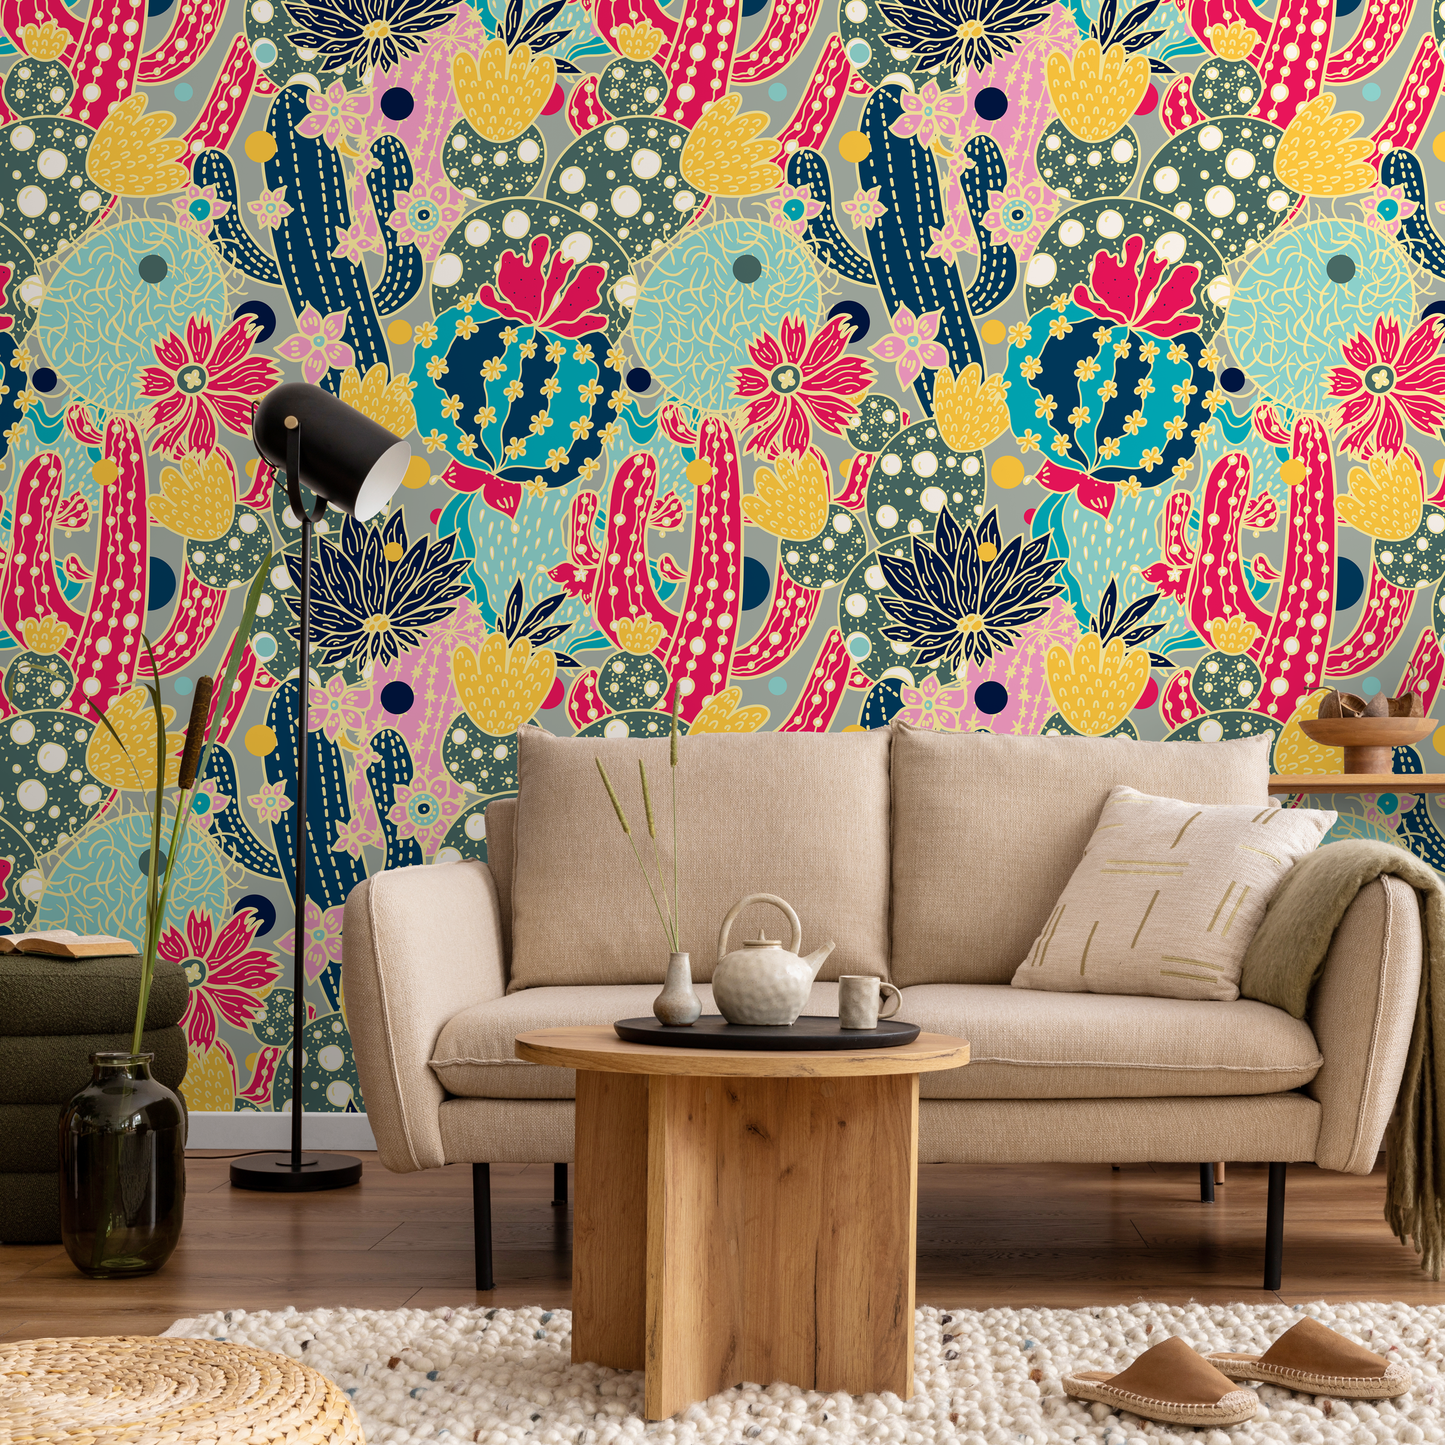 Removable Wallpaper Peel and Stick Wallpaper Wall Paper Wall Mural - Contemporary Cactus Wallpaper  - A884